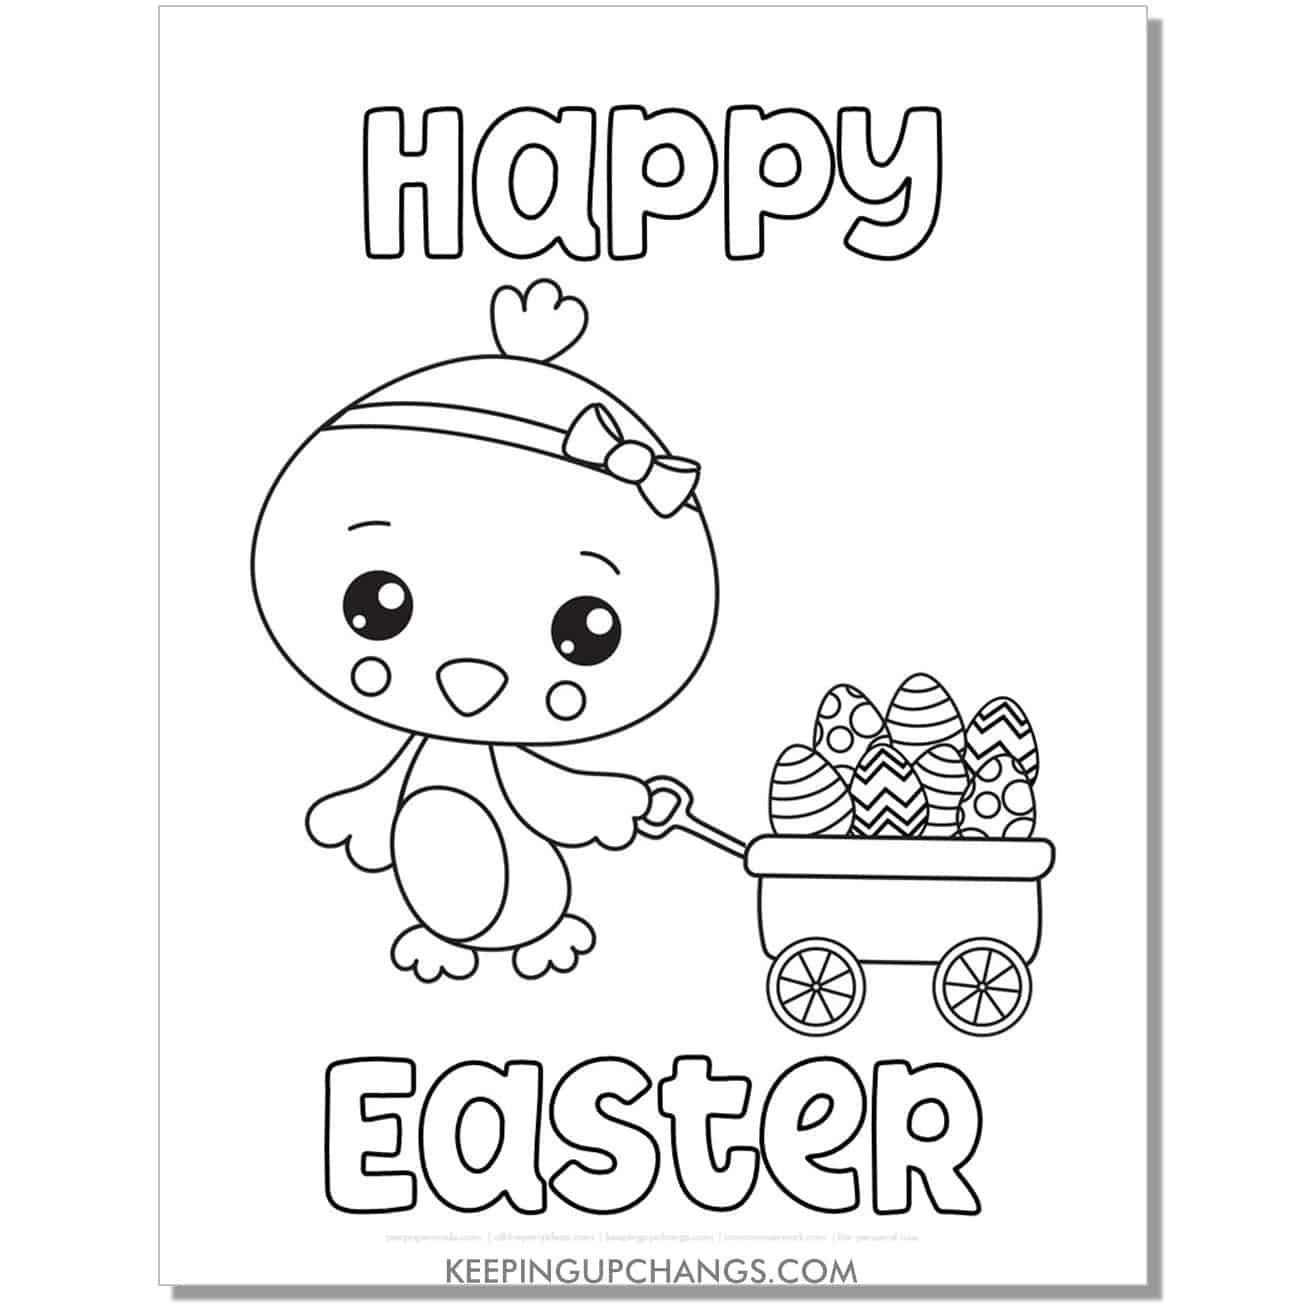 happy easter chick with wagon of eggs coloring page, sheet.